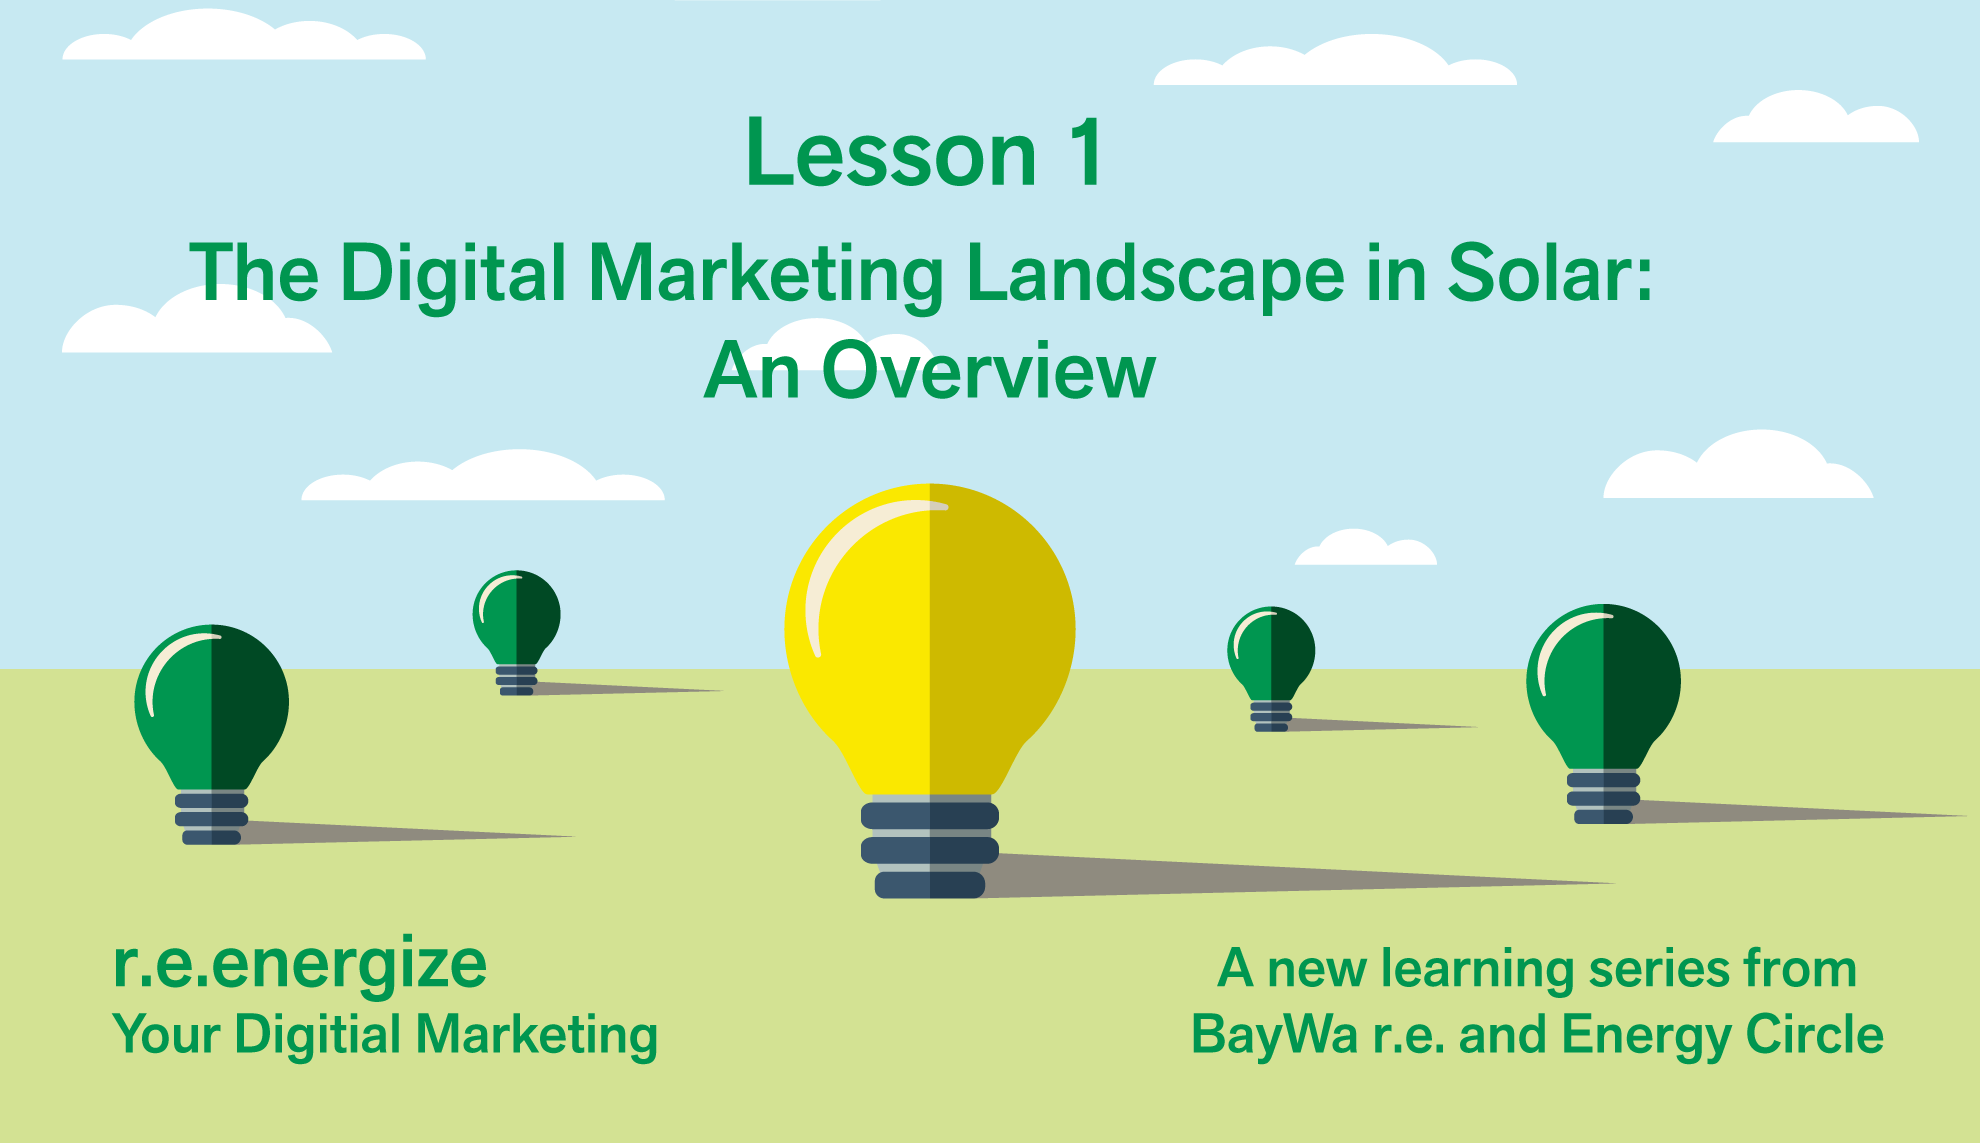 The Digital Marketing Landscape in Solar: An Overview